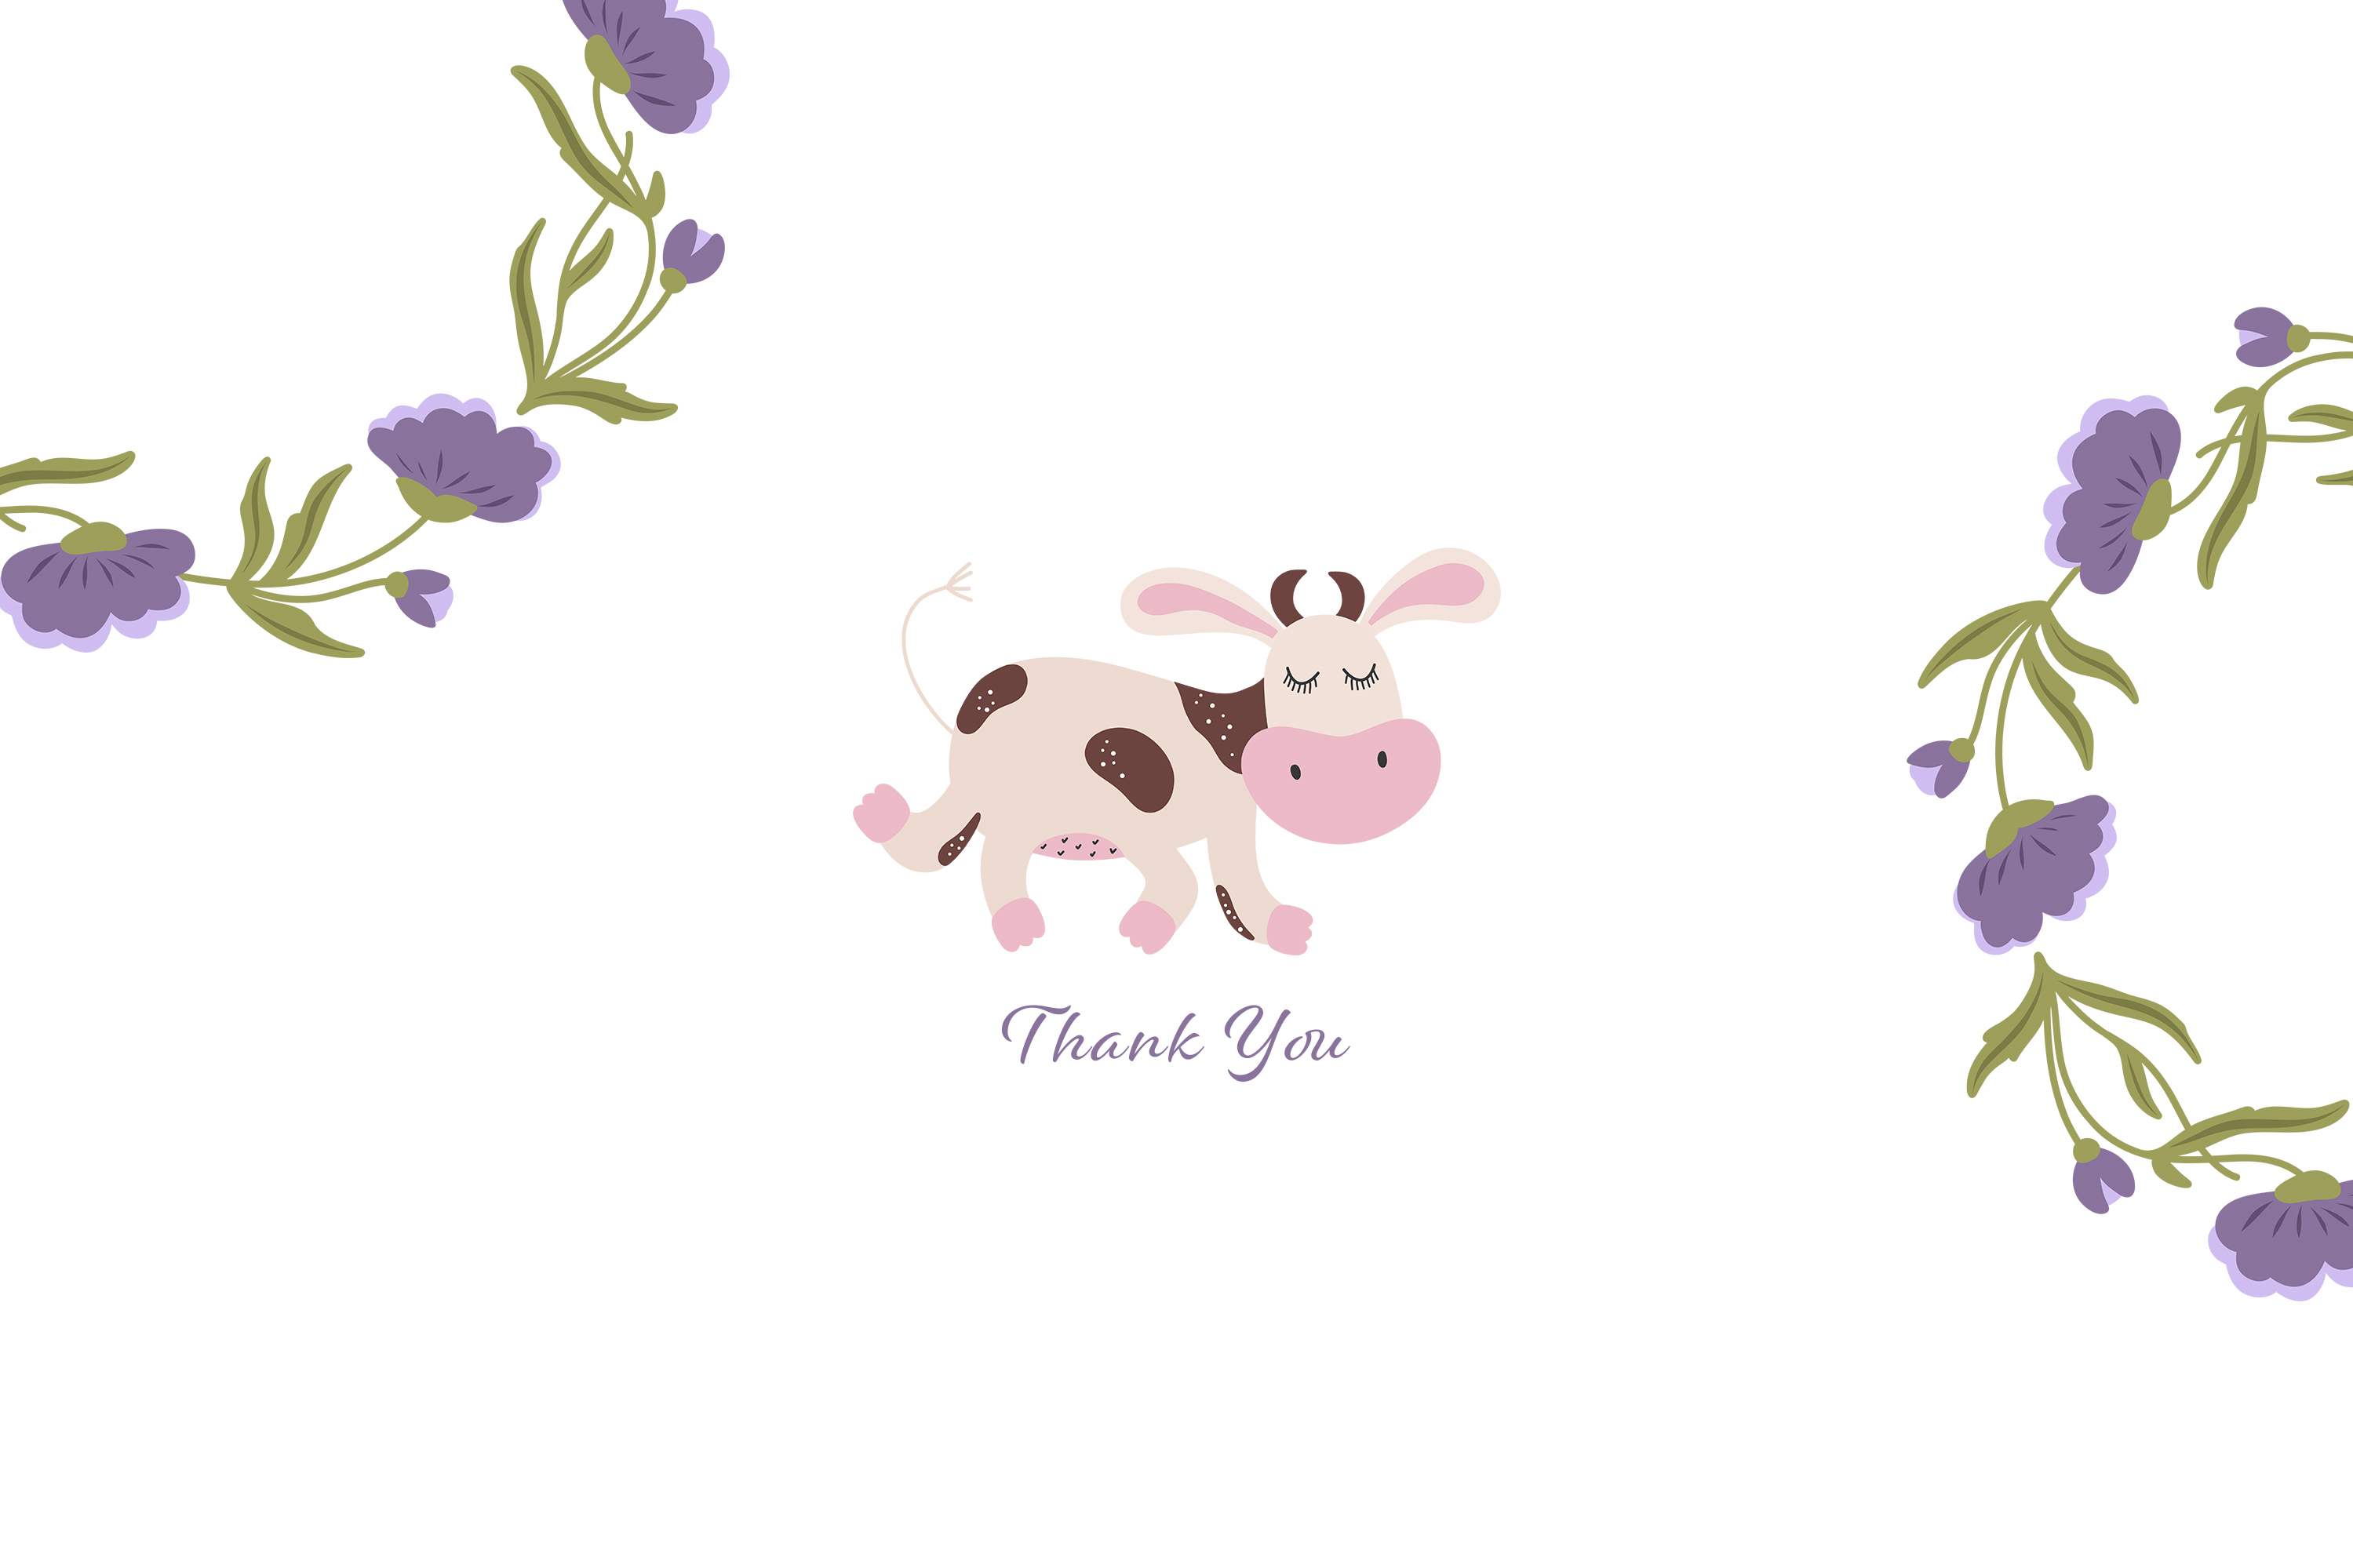 Milky Cows Cute Illustrations thank you image.